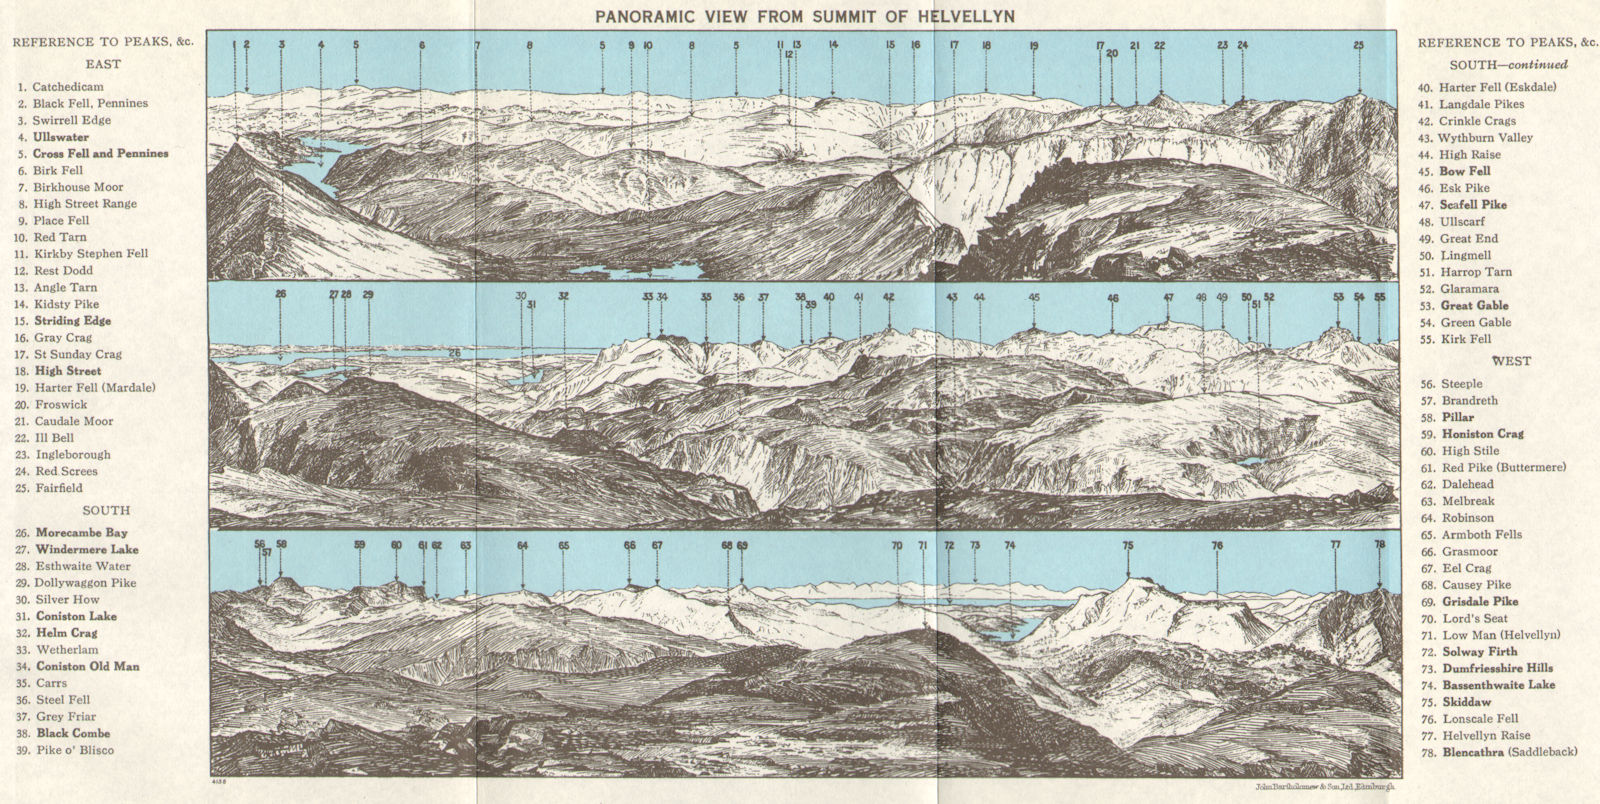 LAKE DISTRICT Panoramic view from sumit of Helvellyn. Cumbria 1971 old map